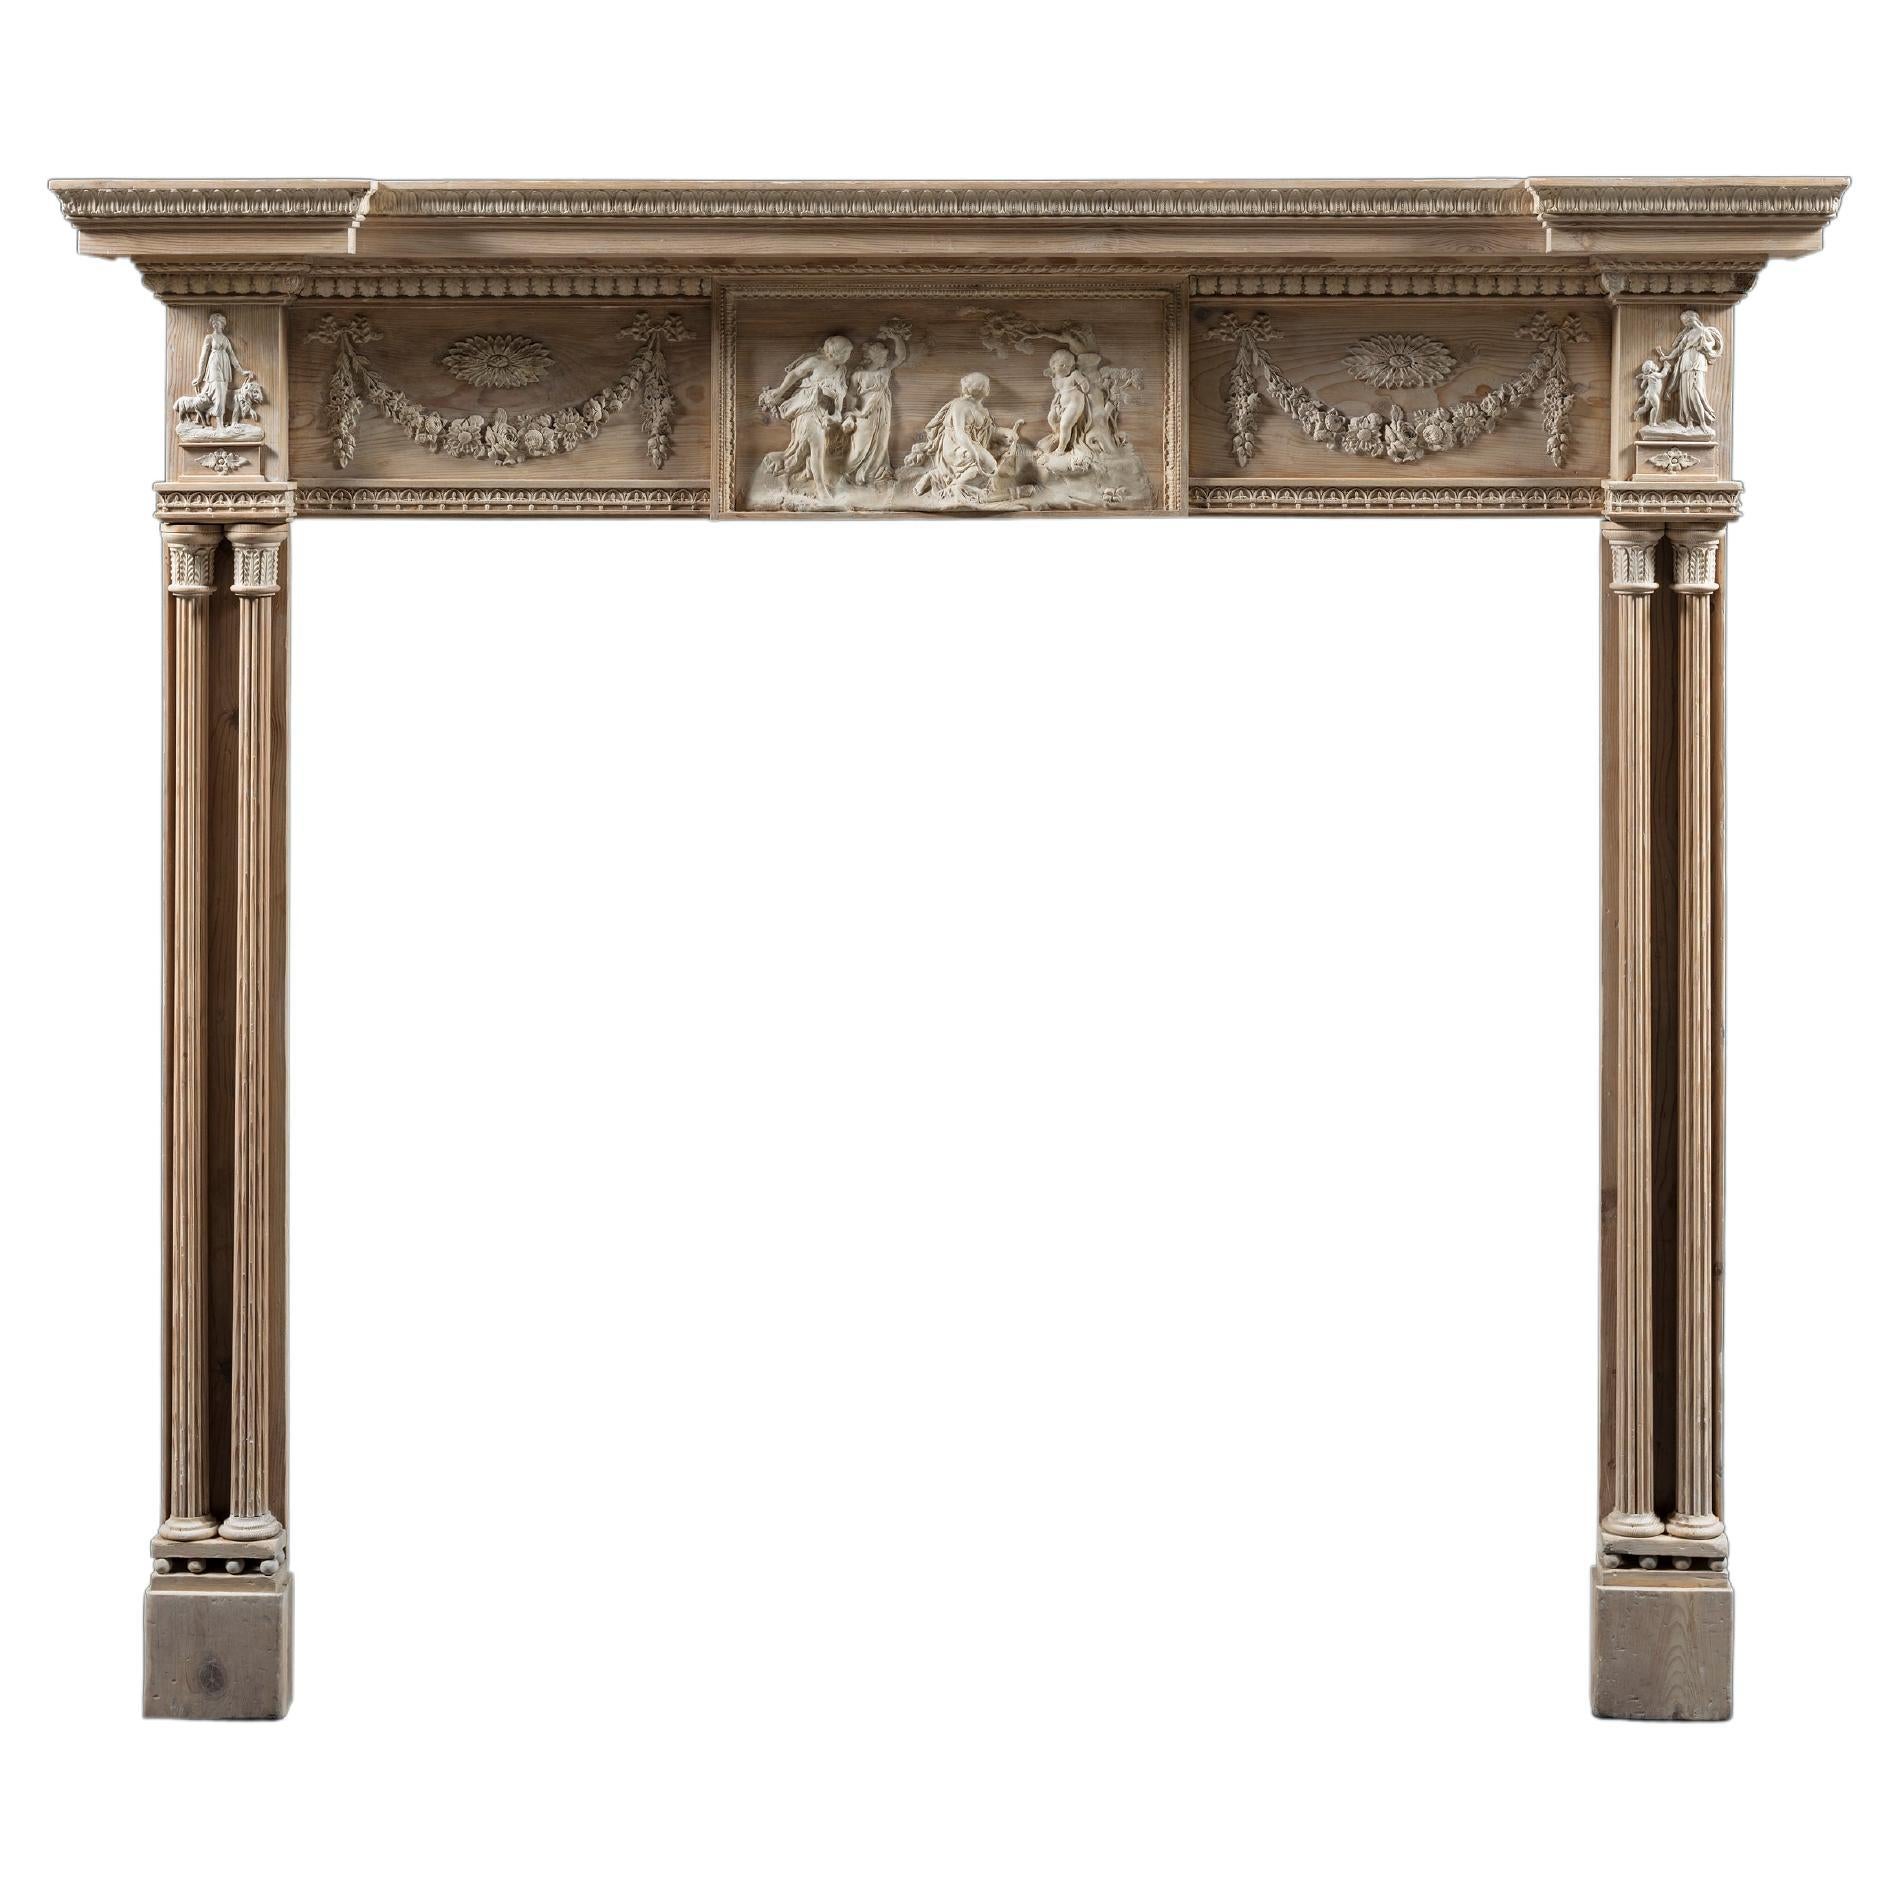 Late 18th Century Scottish Neoclassical Pine and Gesso Chimneypiece